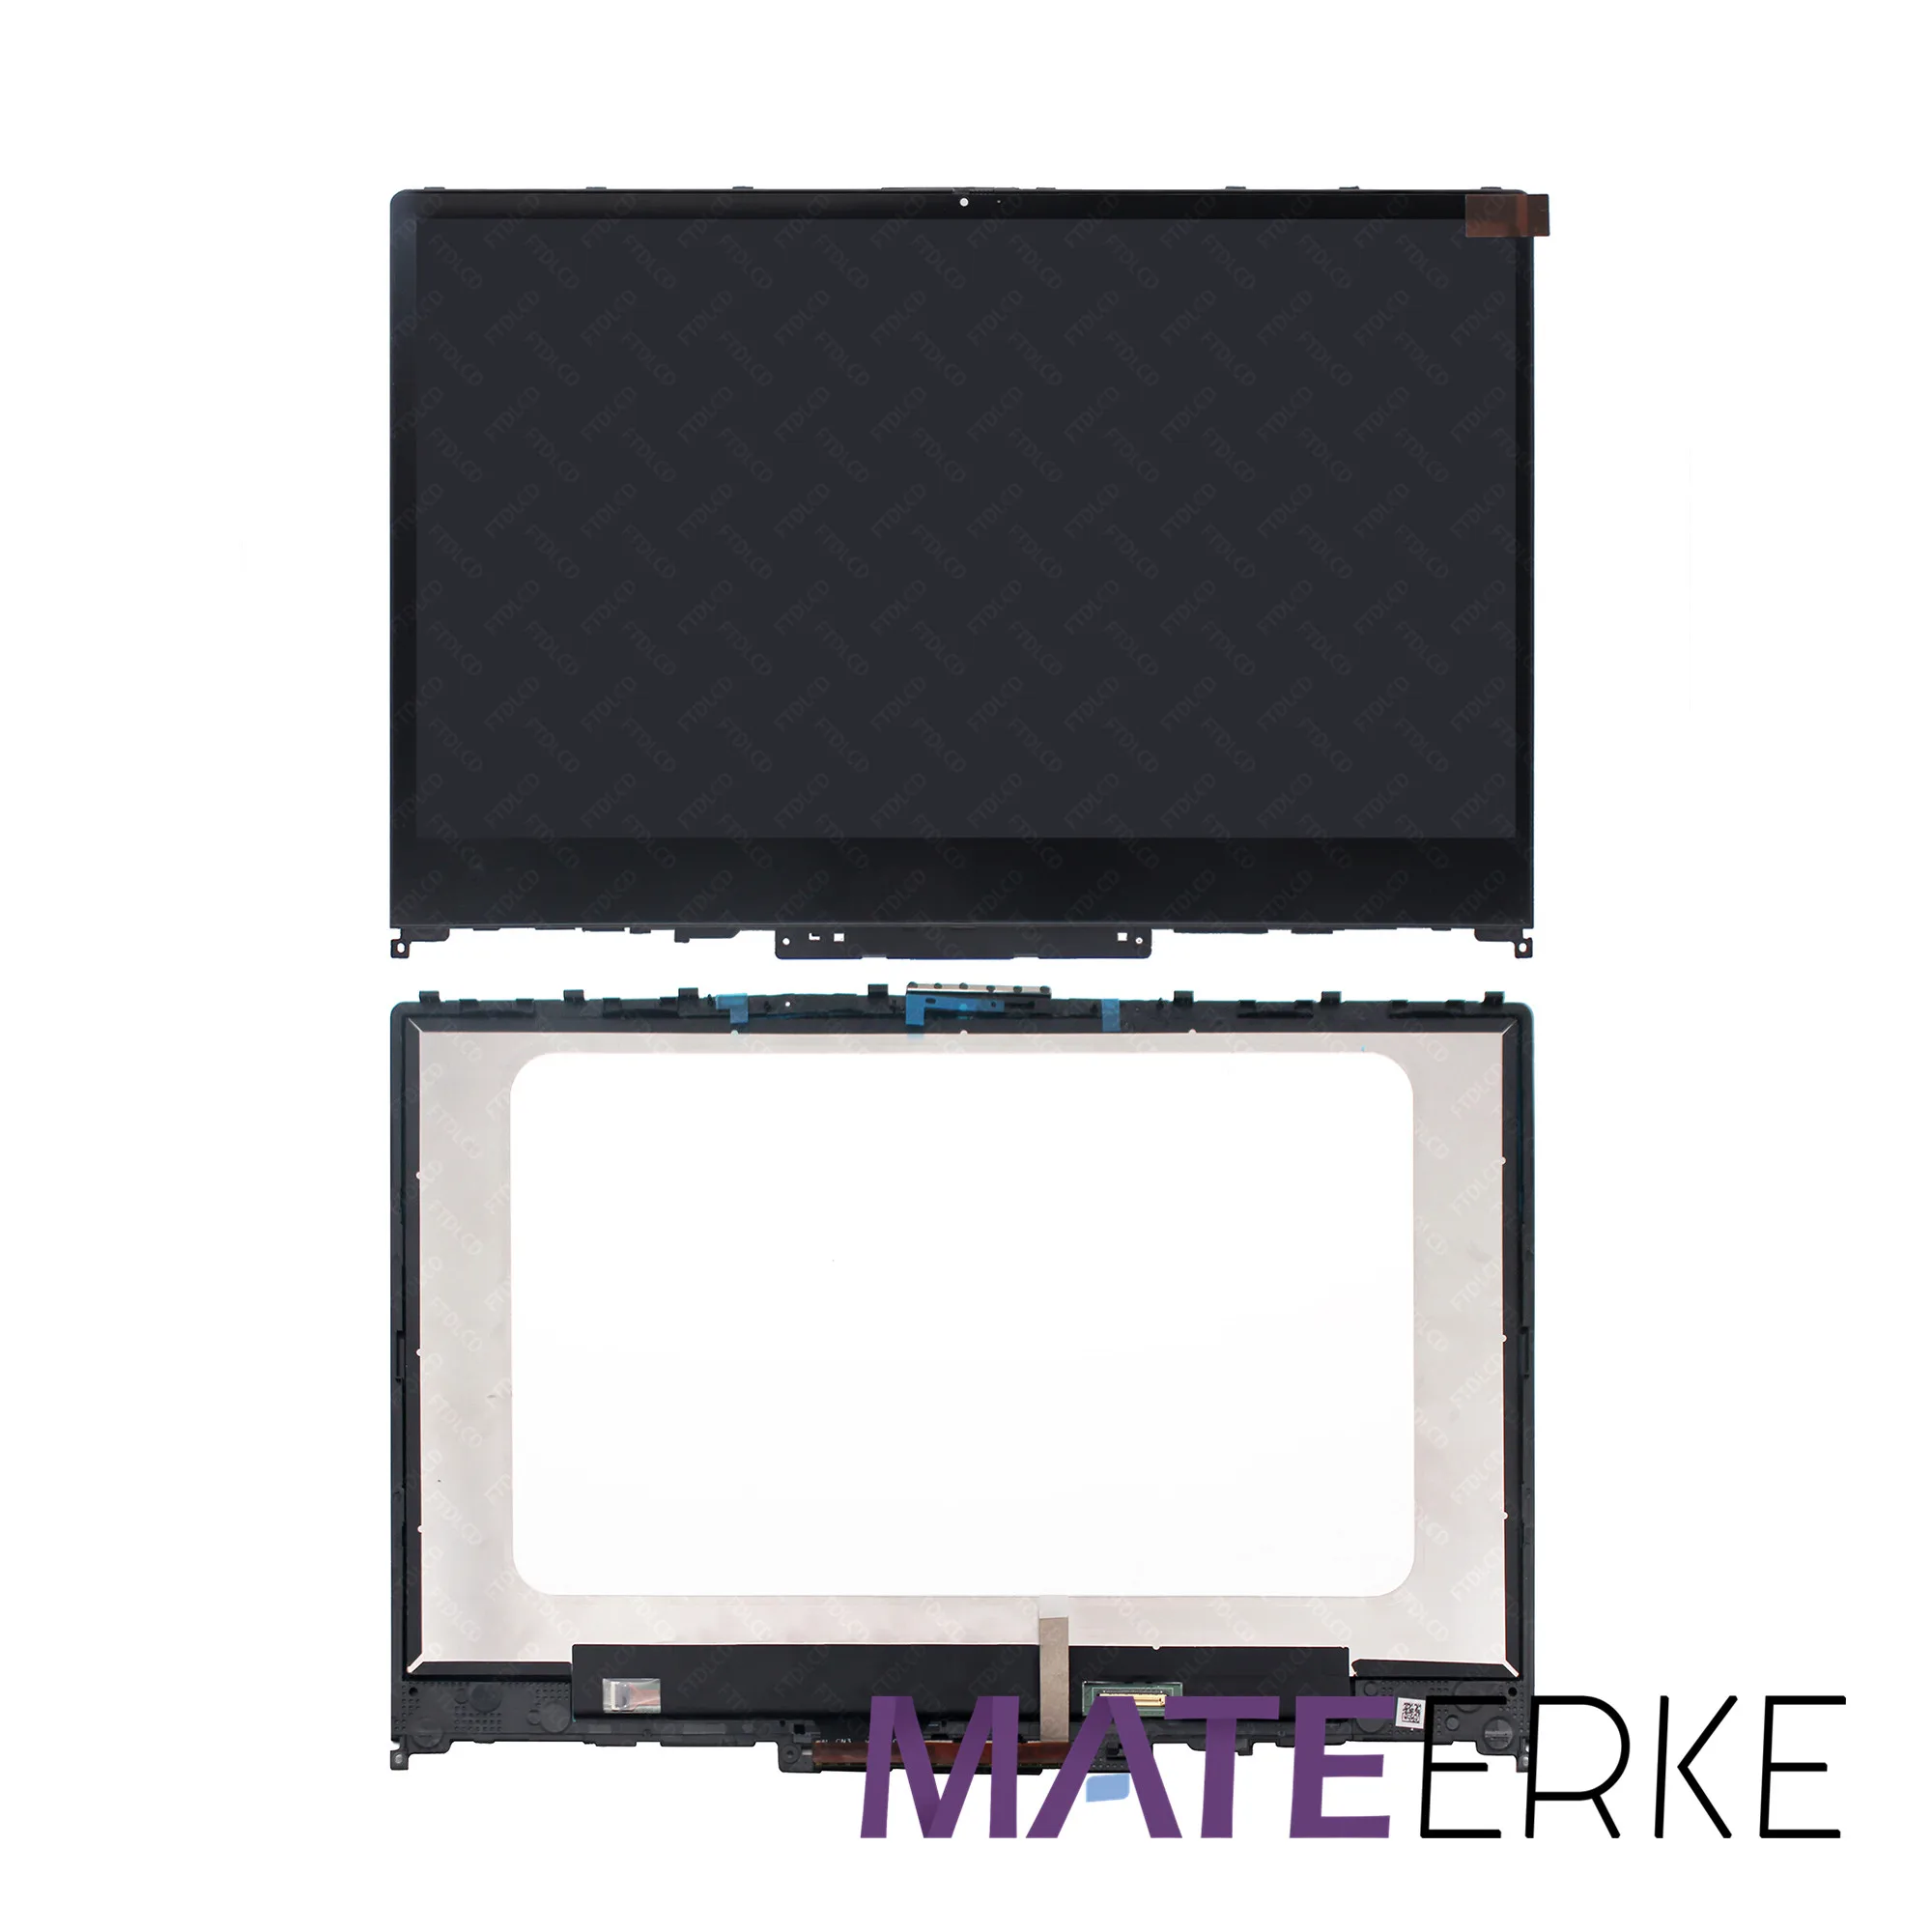 

For Lenovo IdeaPad C340-14IWL 81N4 81N4005DHH 81N4001MGE LED LCD Touch Screen Digitizer Assembly with Bezel 1366x768 1920x1080